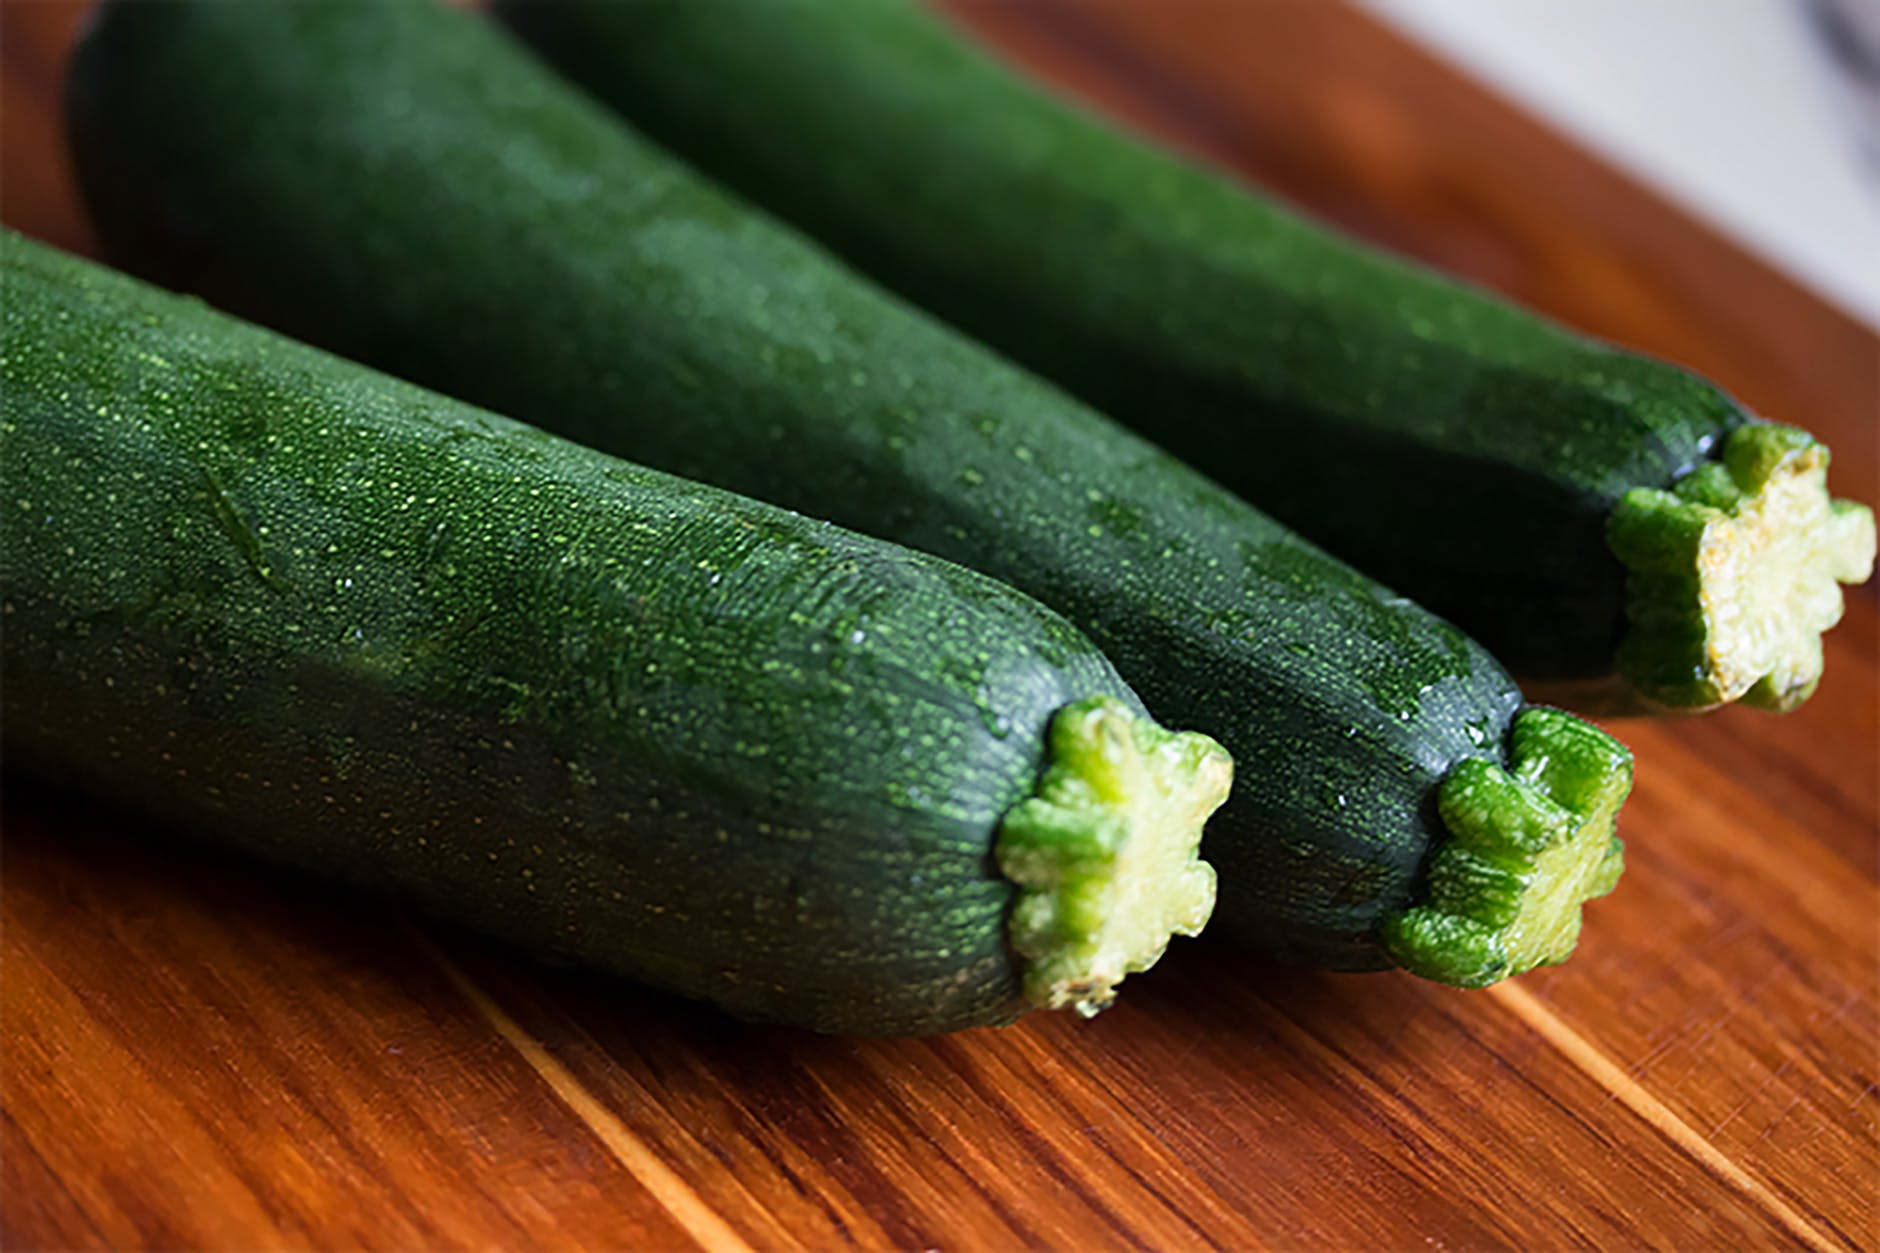 Is Cucumber Good for You - Cucumber Benefits for Health